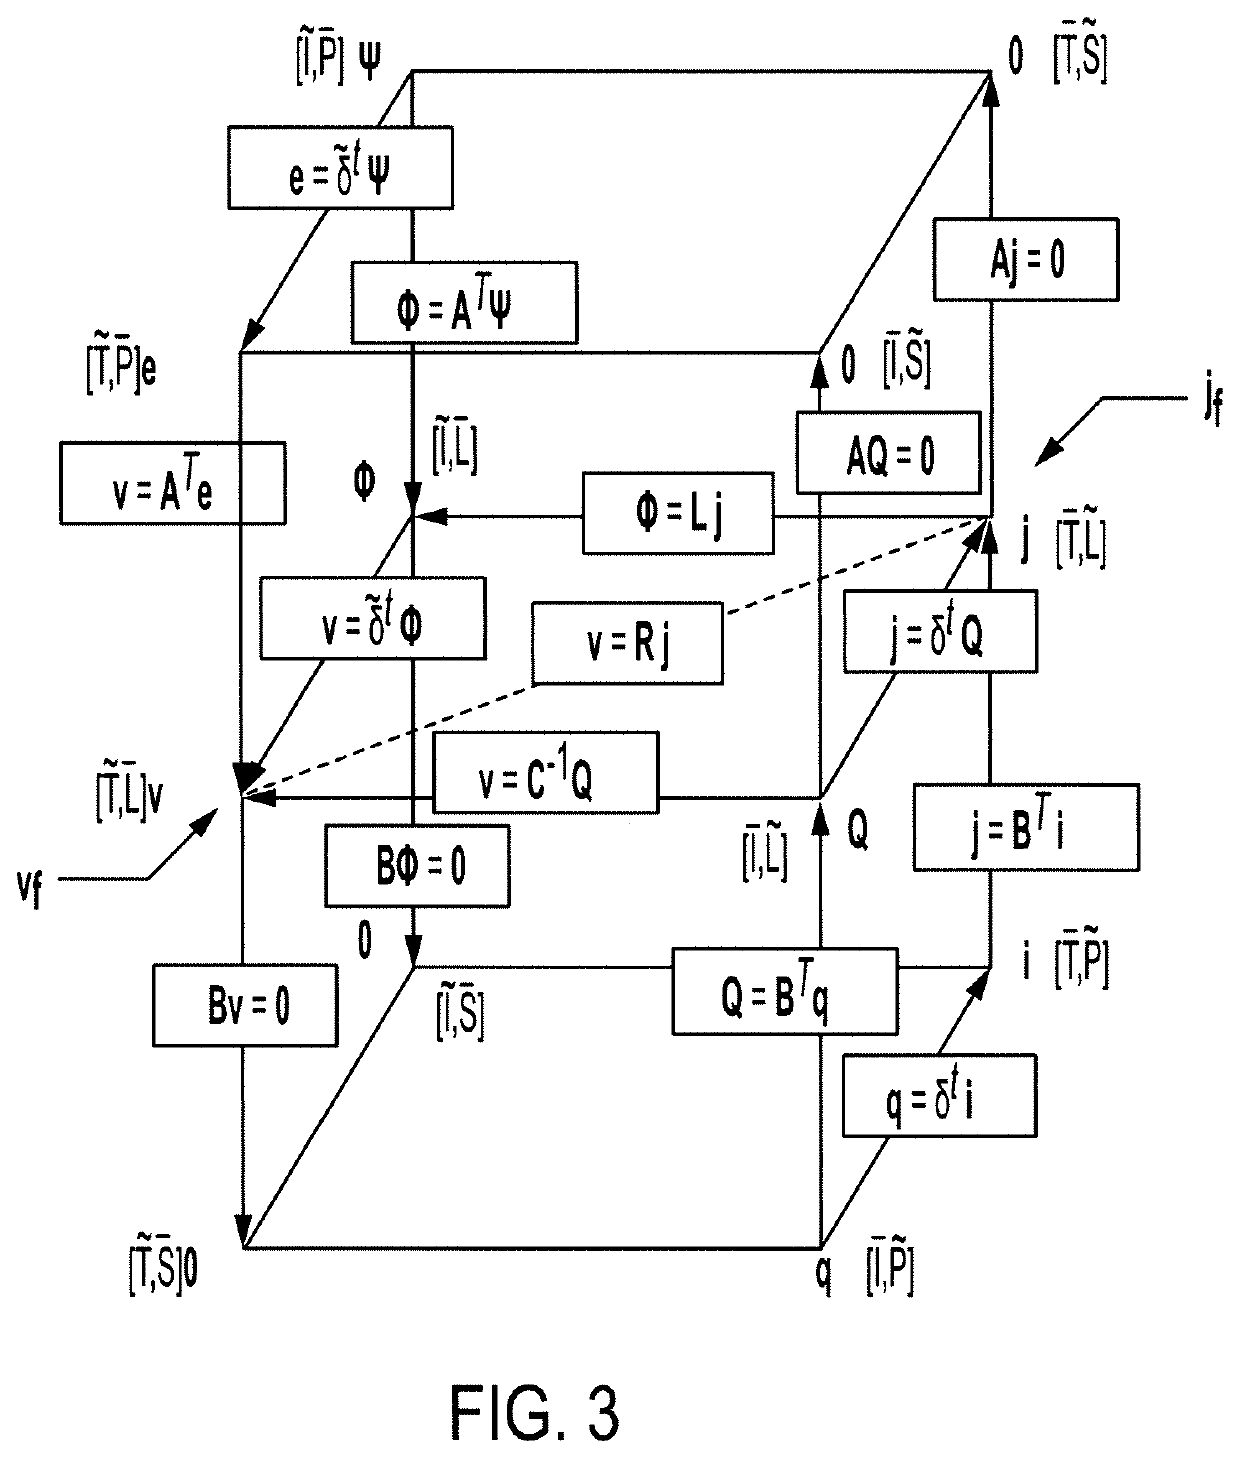 Method and system for qualitative reasoning of spatio-temporal physical systems